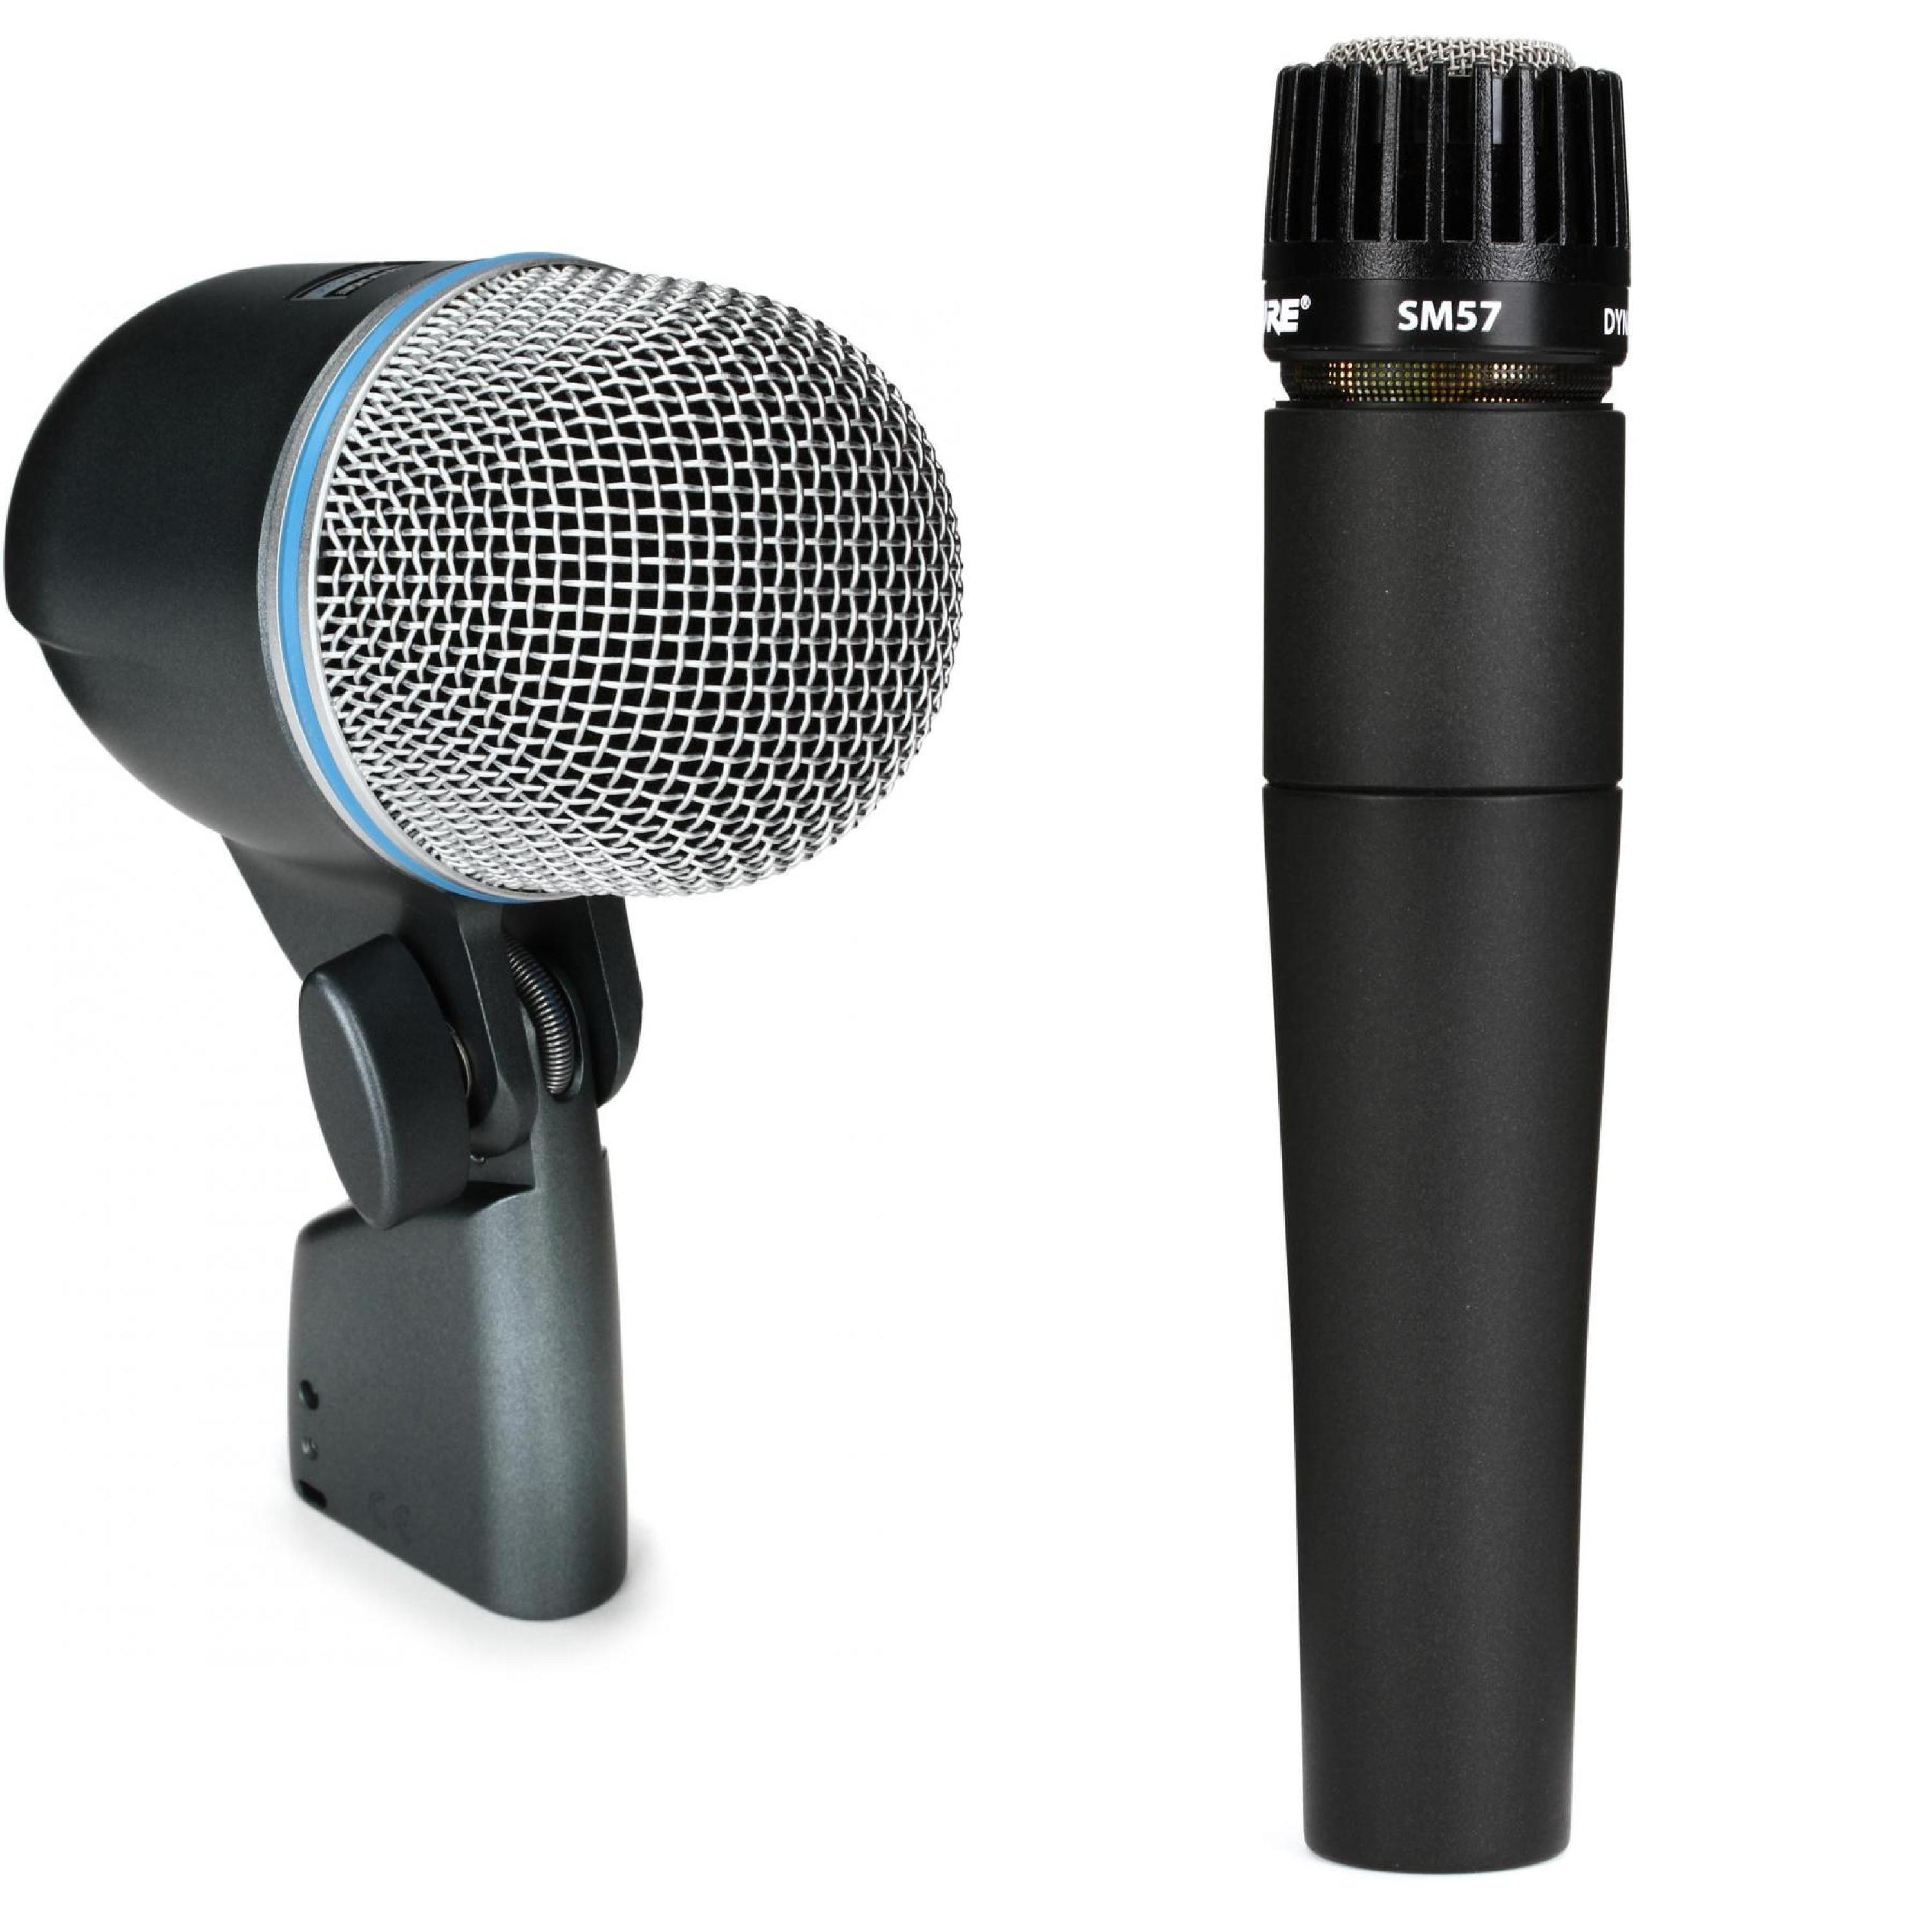 Shure SM57 review